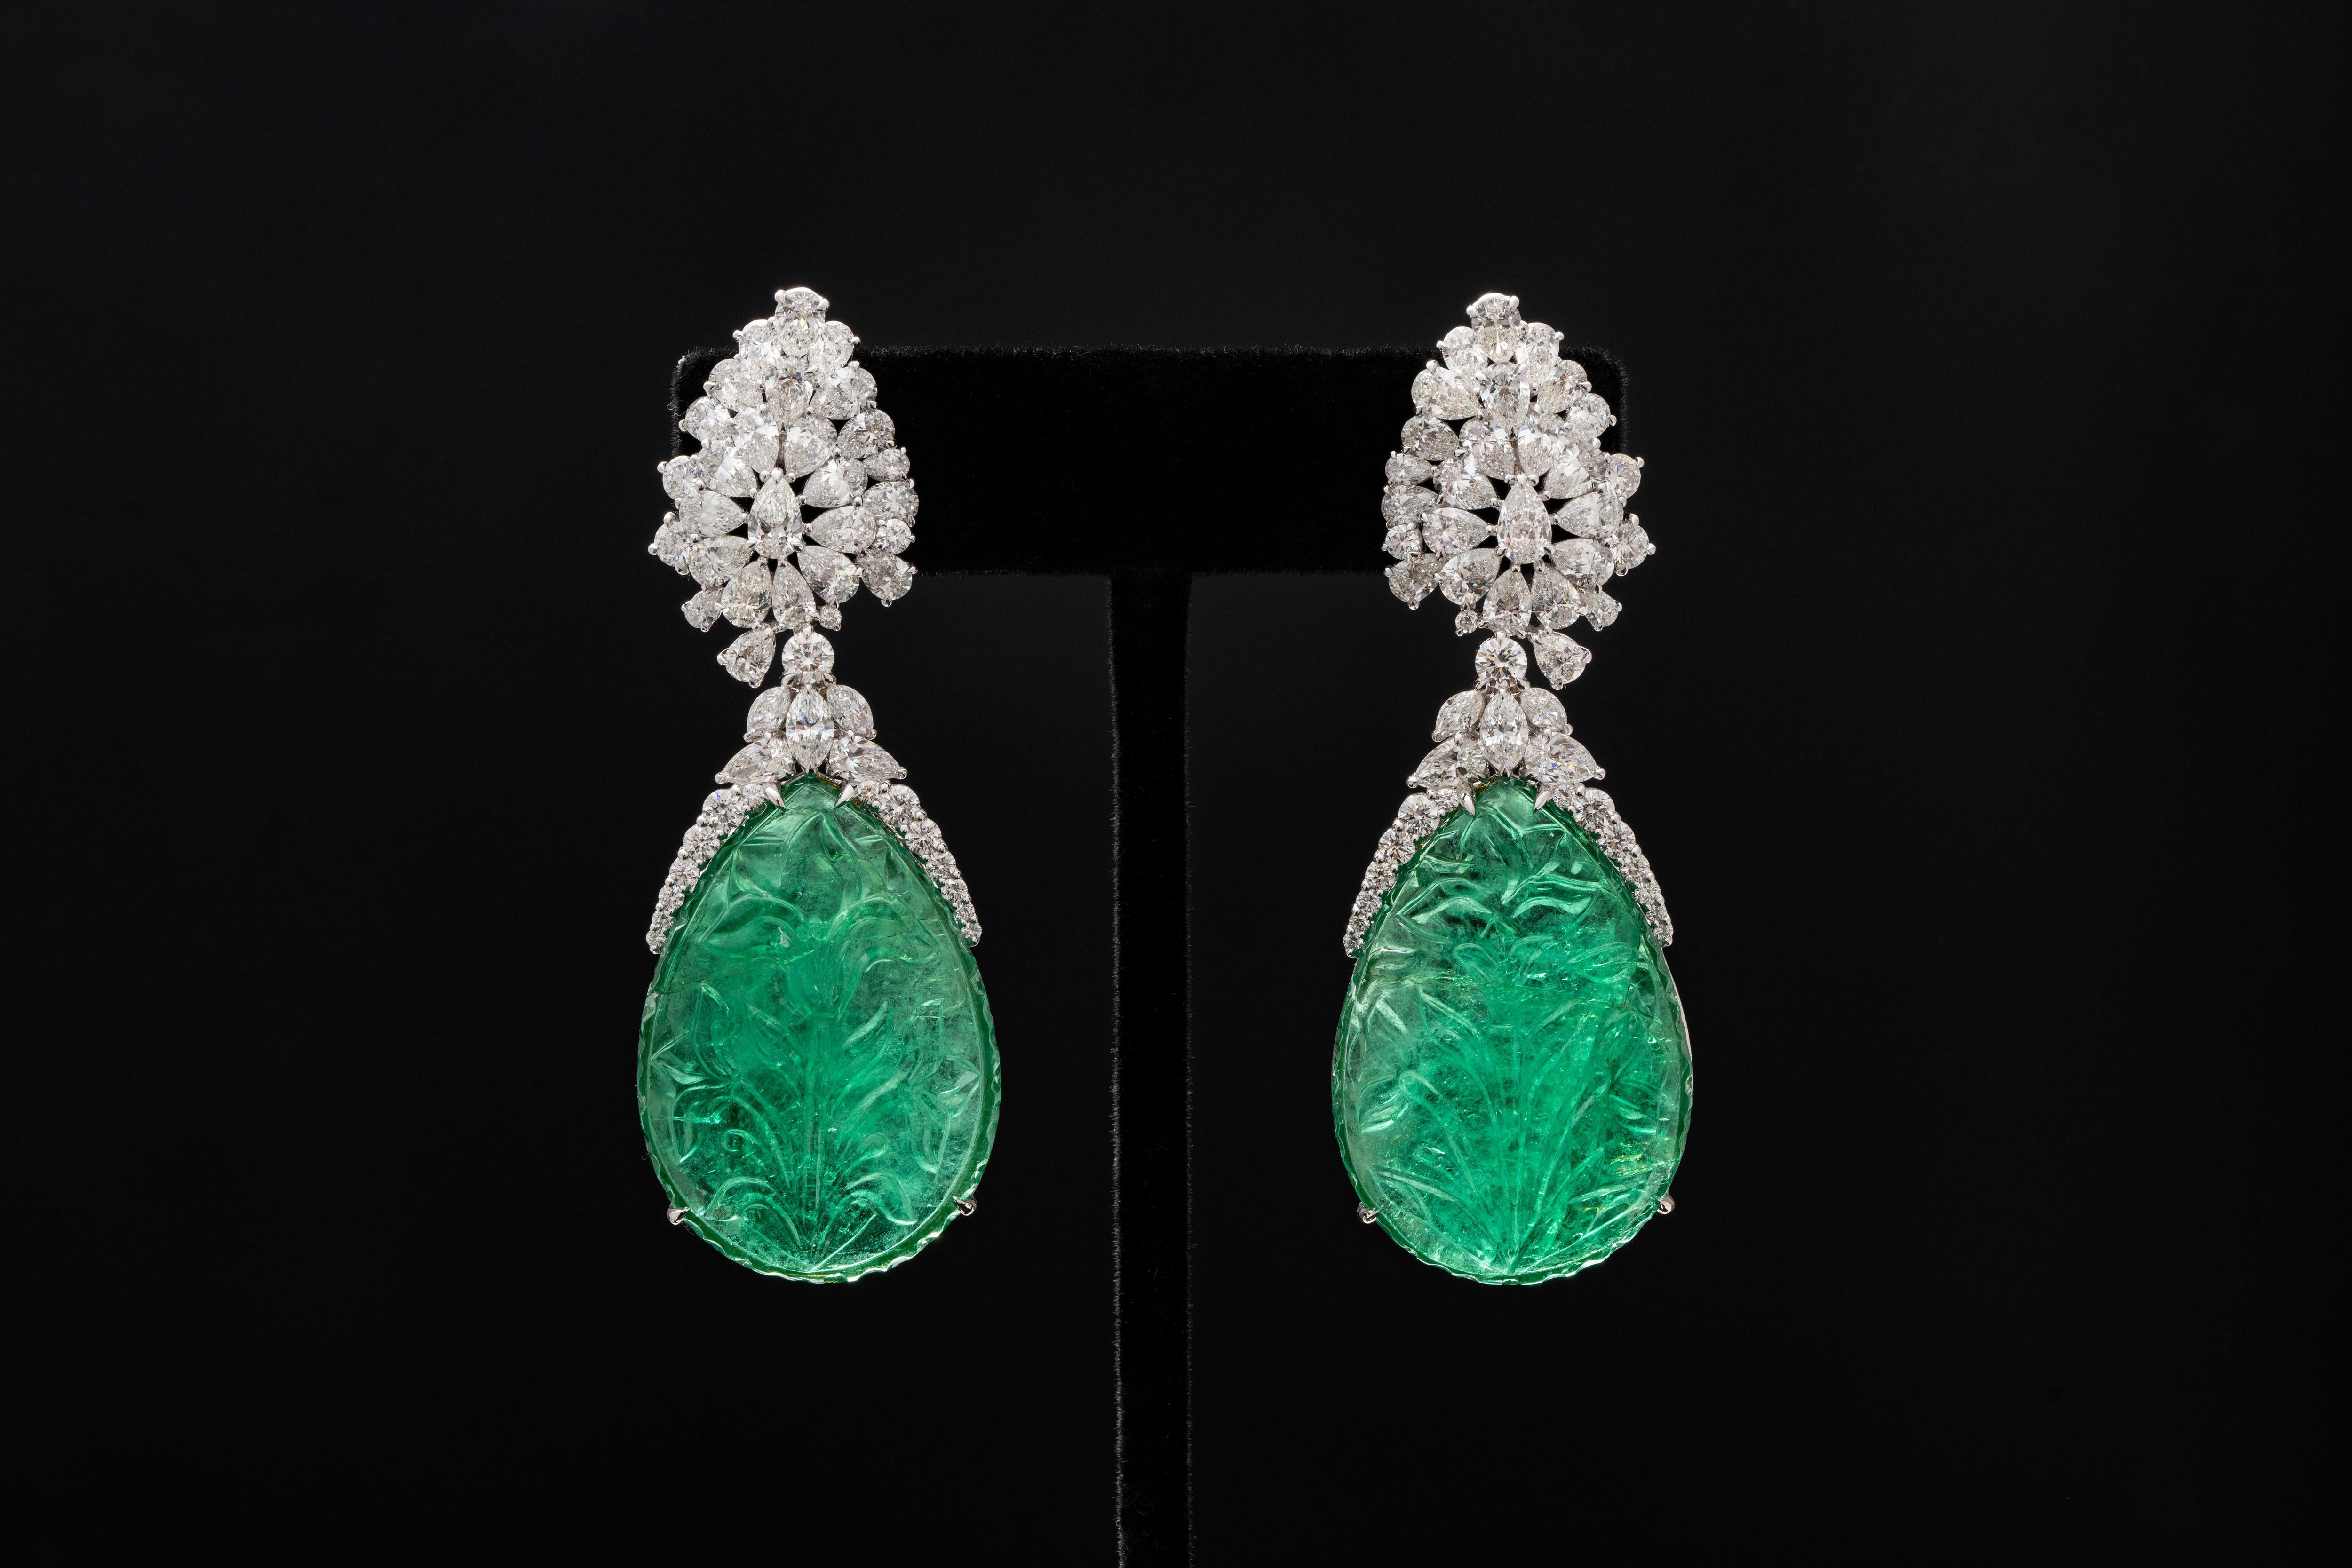 Set with a perfect pair of pear-shaped one carved Emeralds, weighing 58.34ct and 53.94ct respectively, mounted in18K, hanging with all pear shape daimond 
Size of 53.94ct: 35.86x25.53x8.20 mm
Size of 58.34ct: 35.91x25.30x8.77 mm